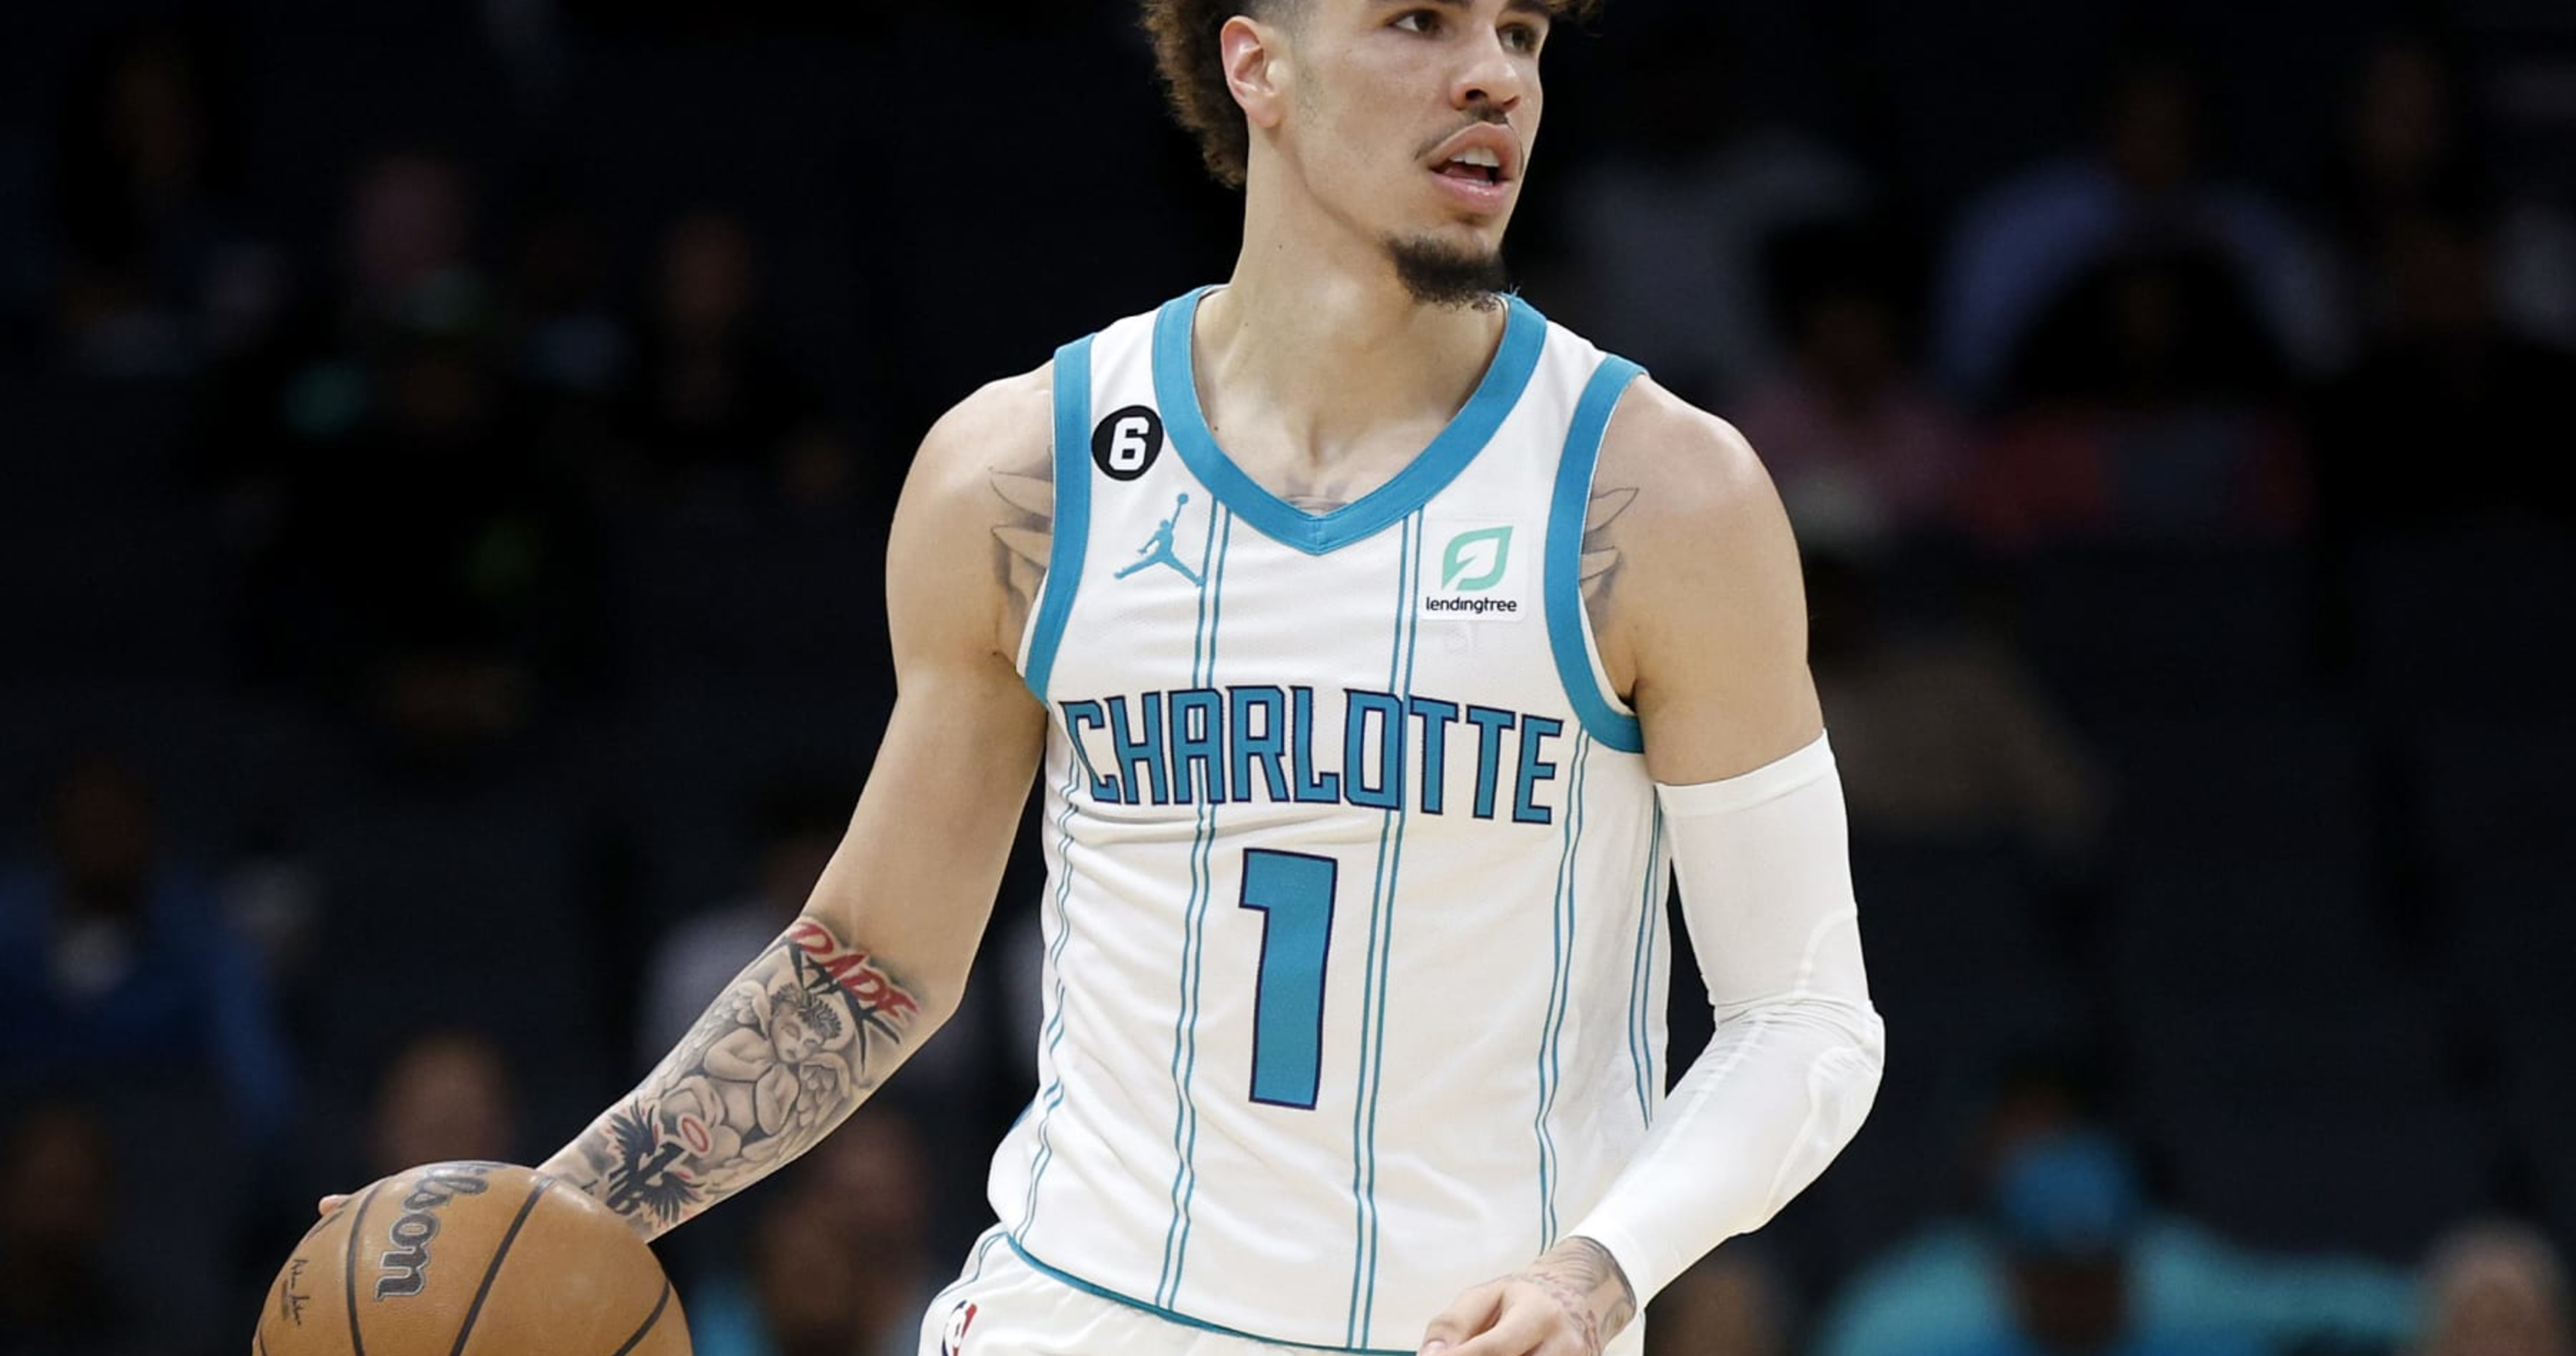 LaMelo Ball out for season with ankle injury, NBA news